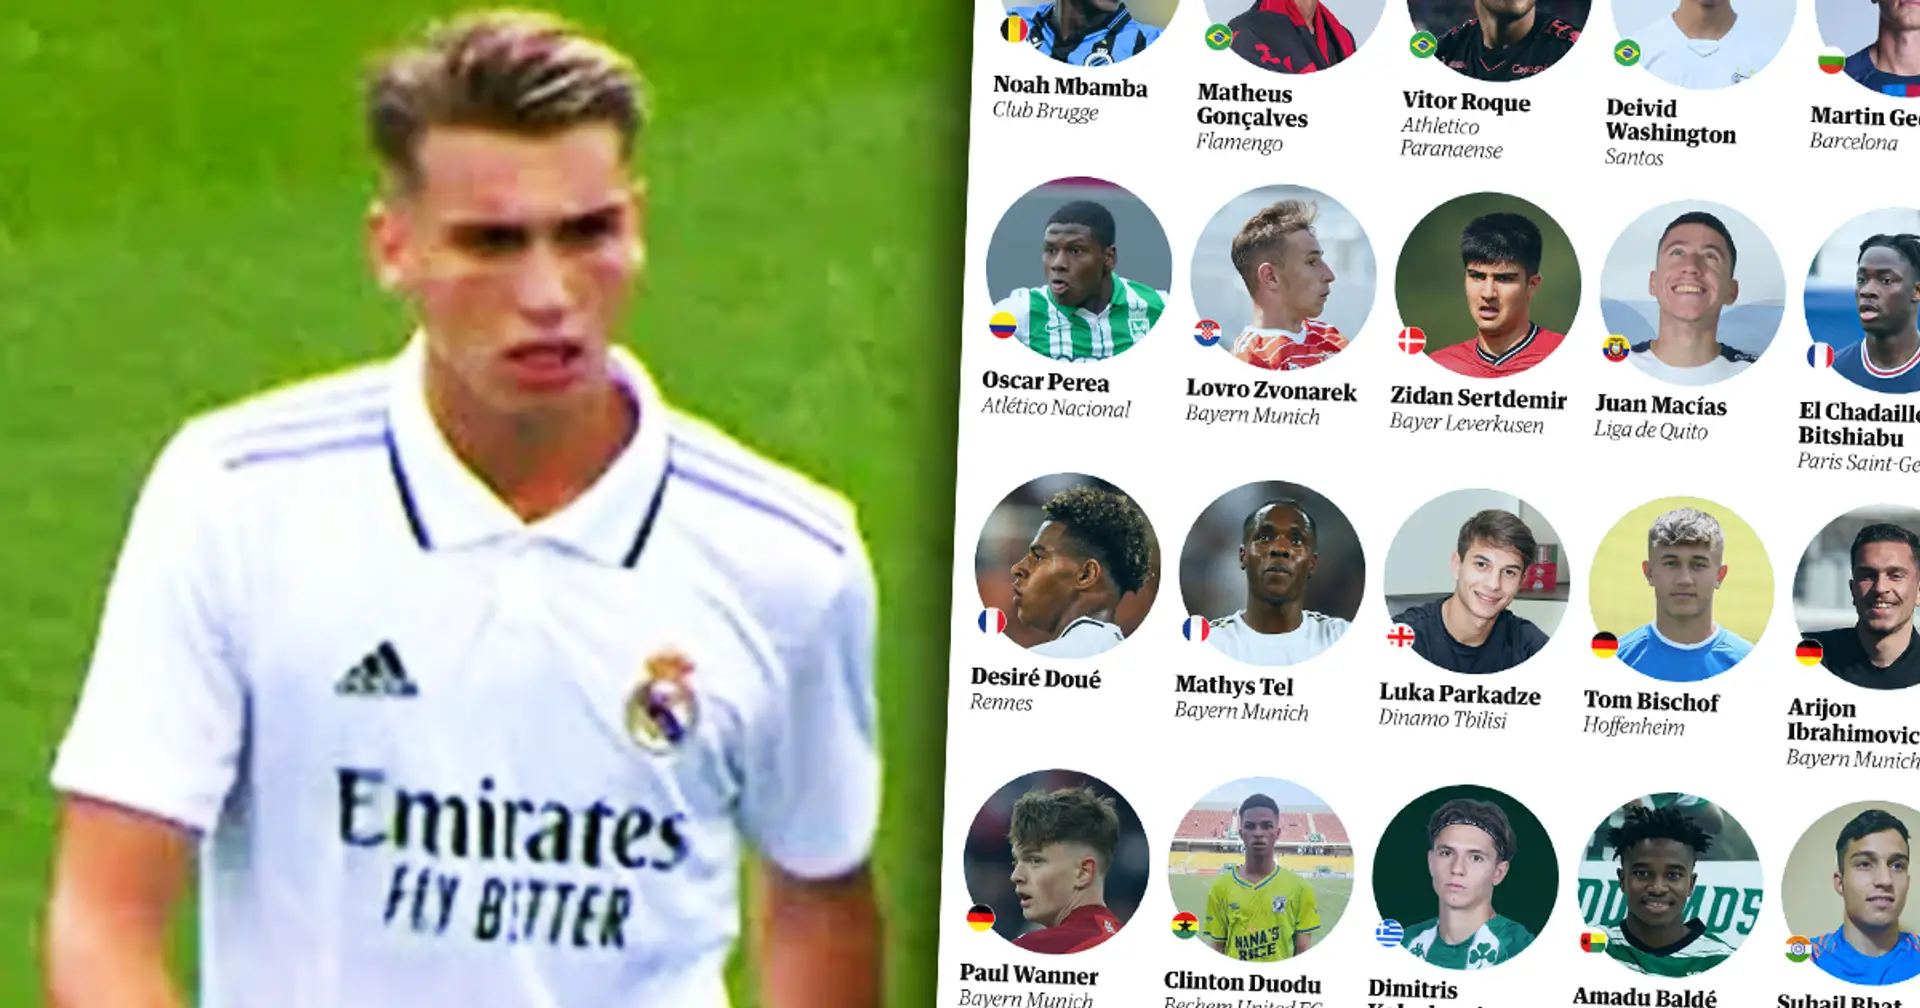 2 under-radar Real Madrid players make list of 60 best young talents